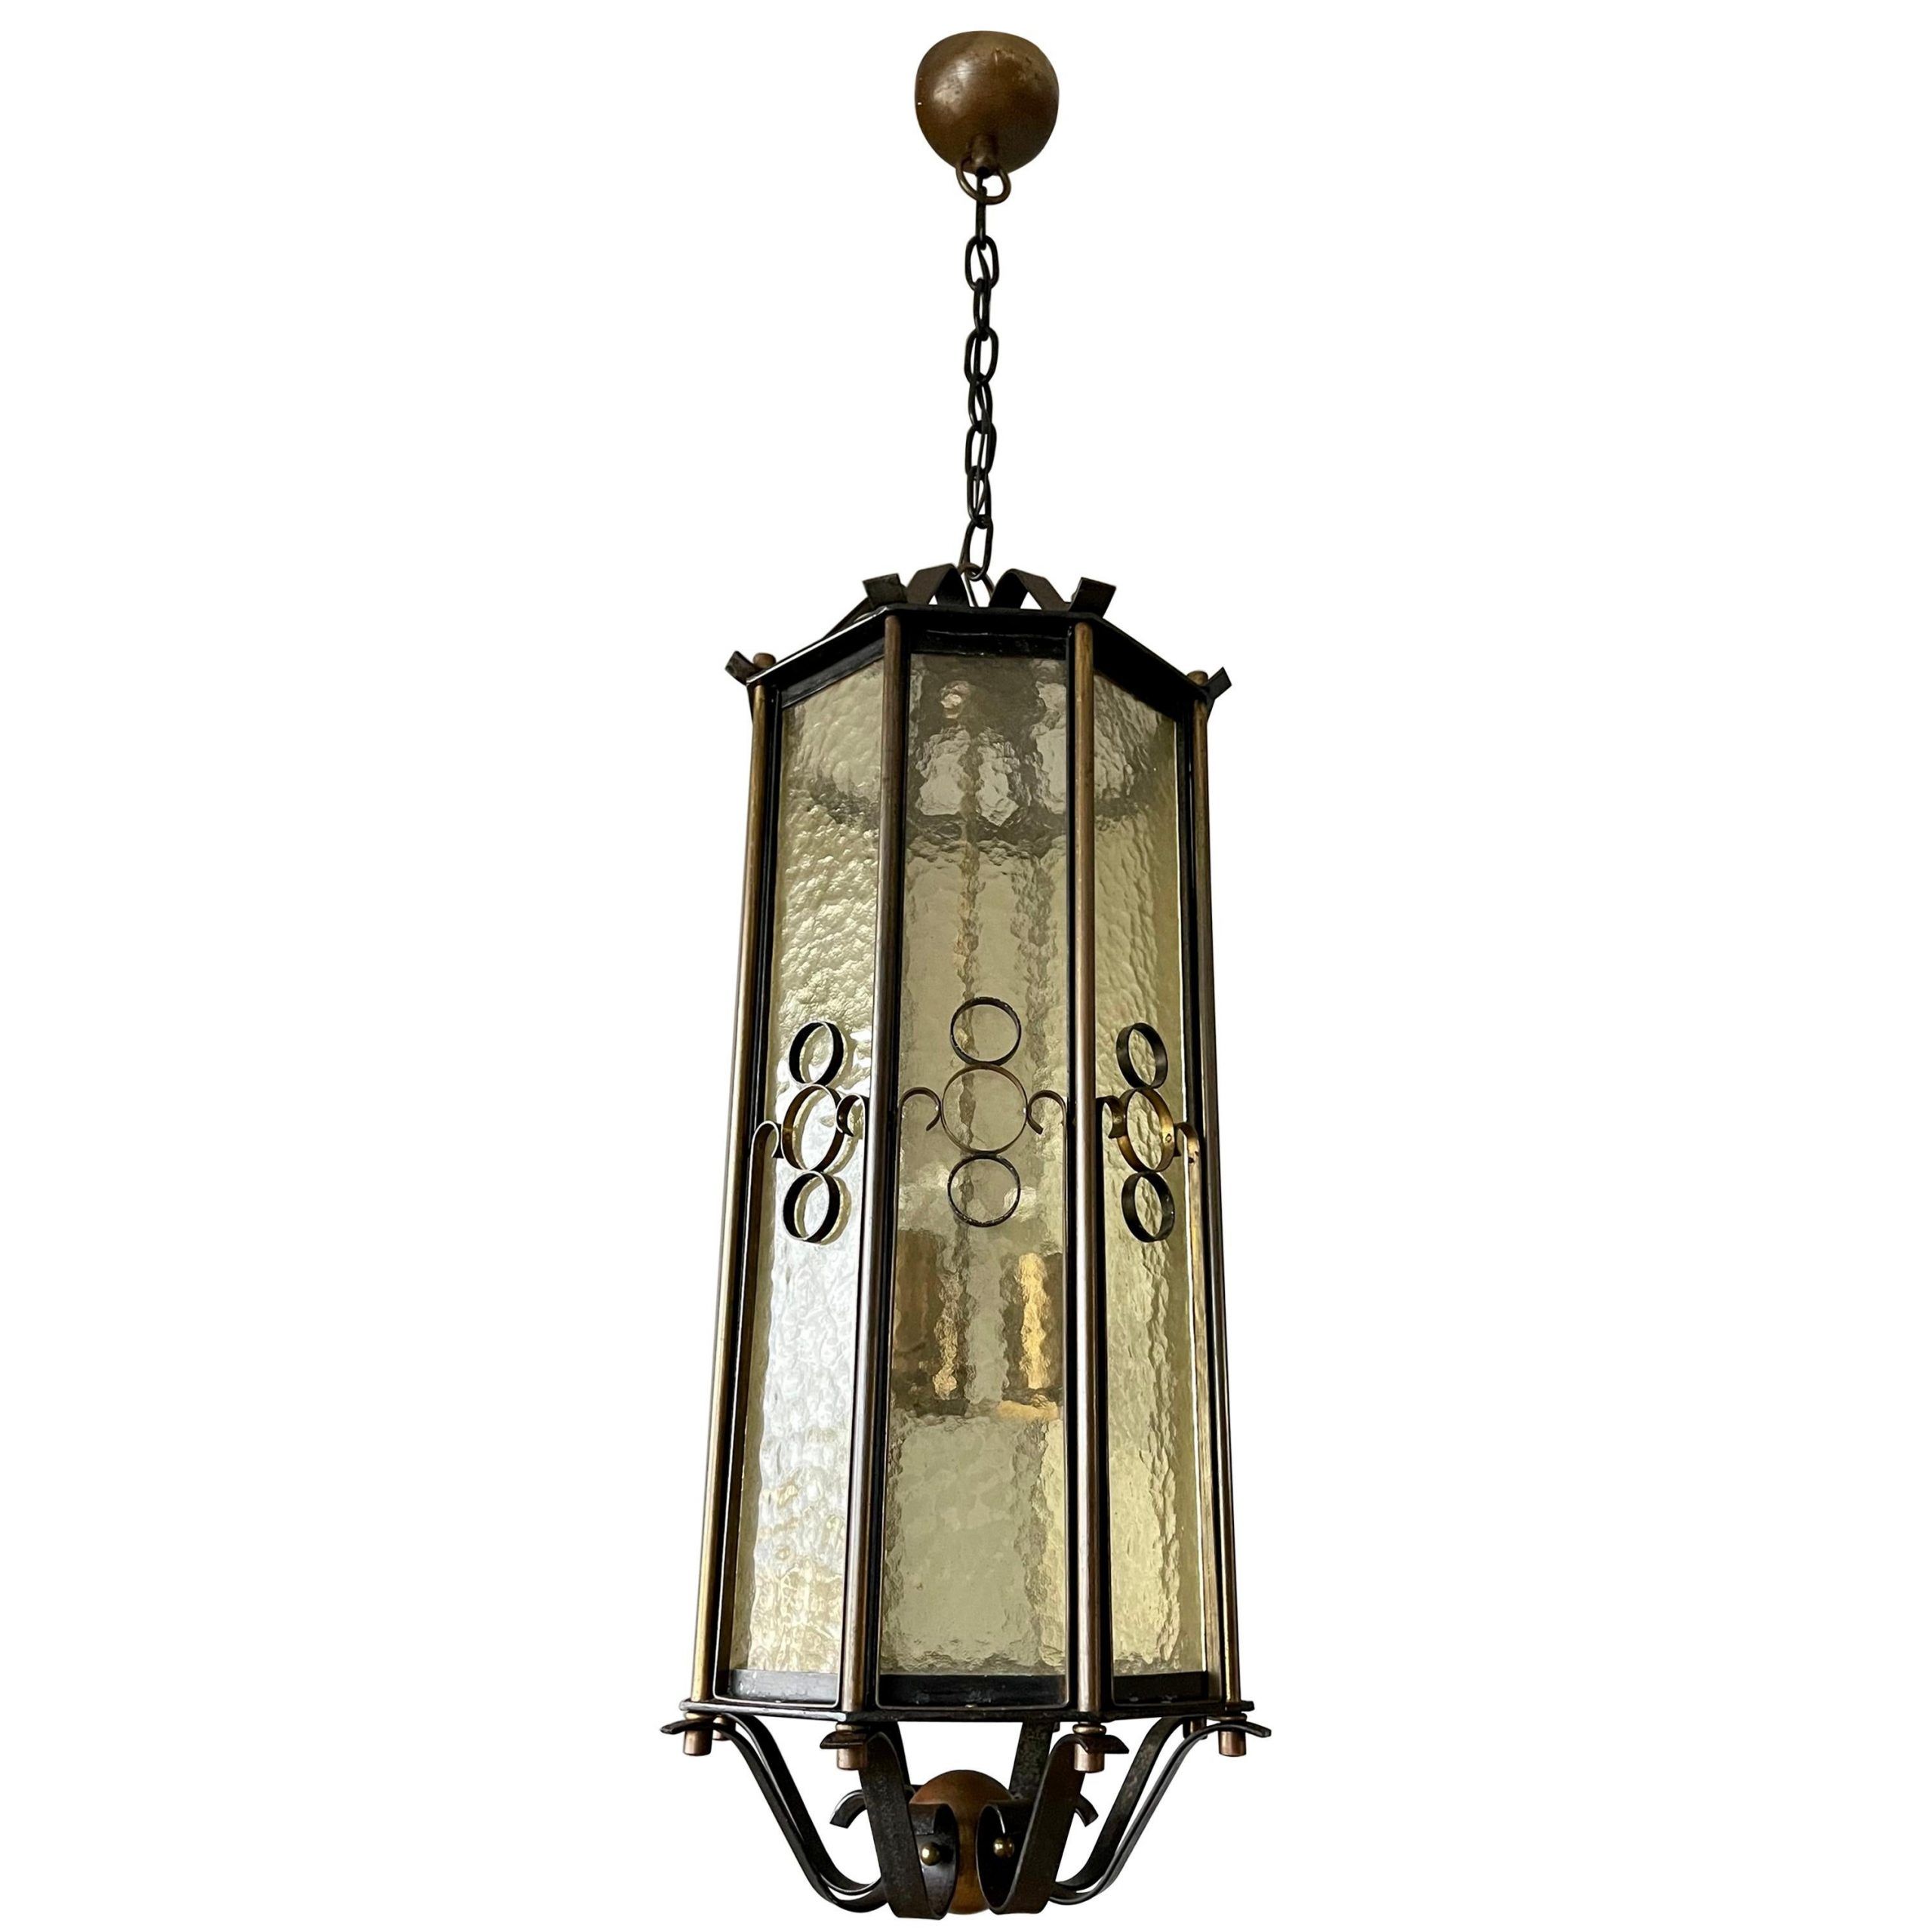 Famous Forged Iron Lantern Chandeliers Within Extra Large Brass And Wrought Iron Lantern / Pendant With Cathedral Glass,  1930s For Sale At 1stdibs (View 9 of 15)